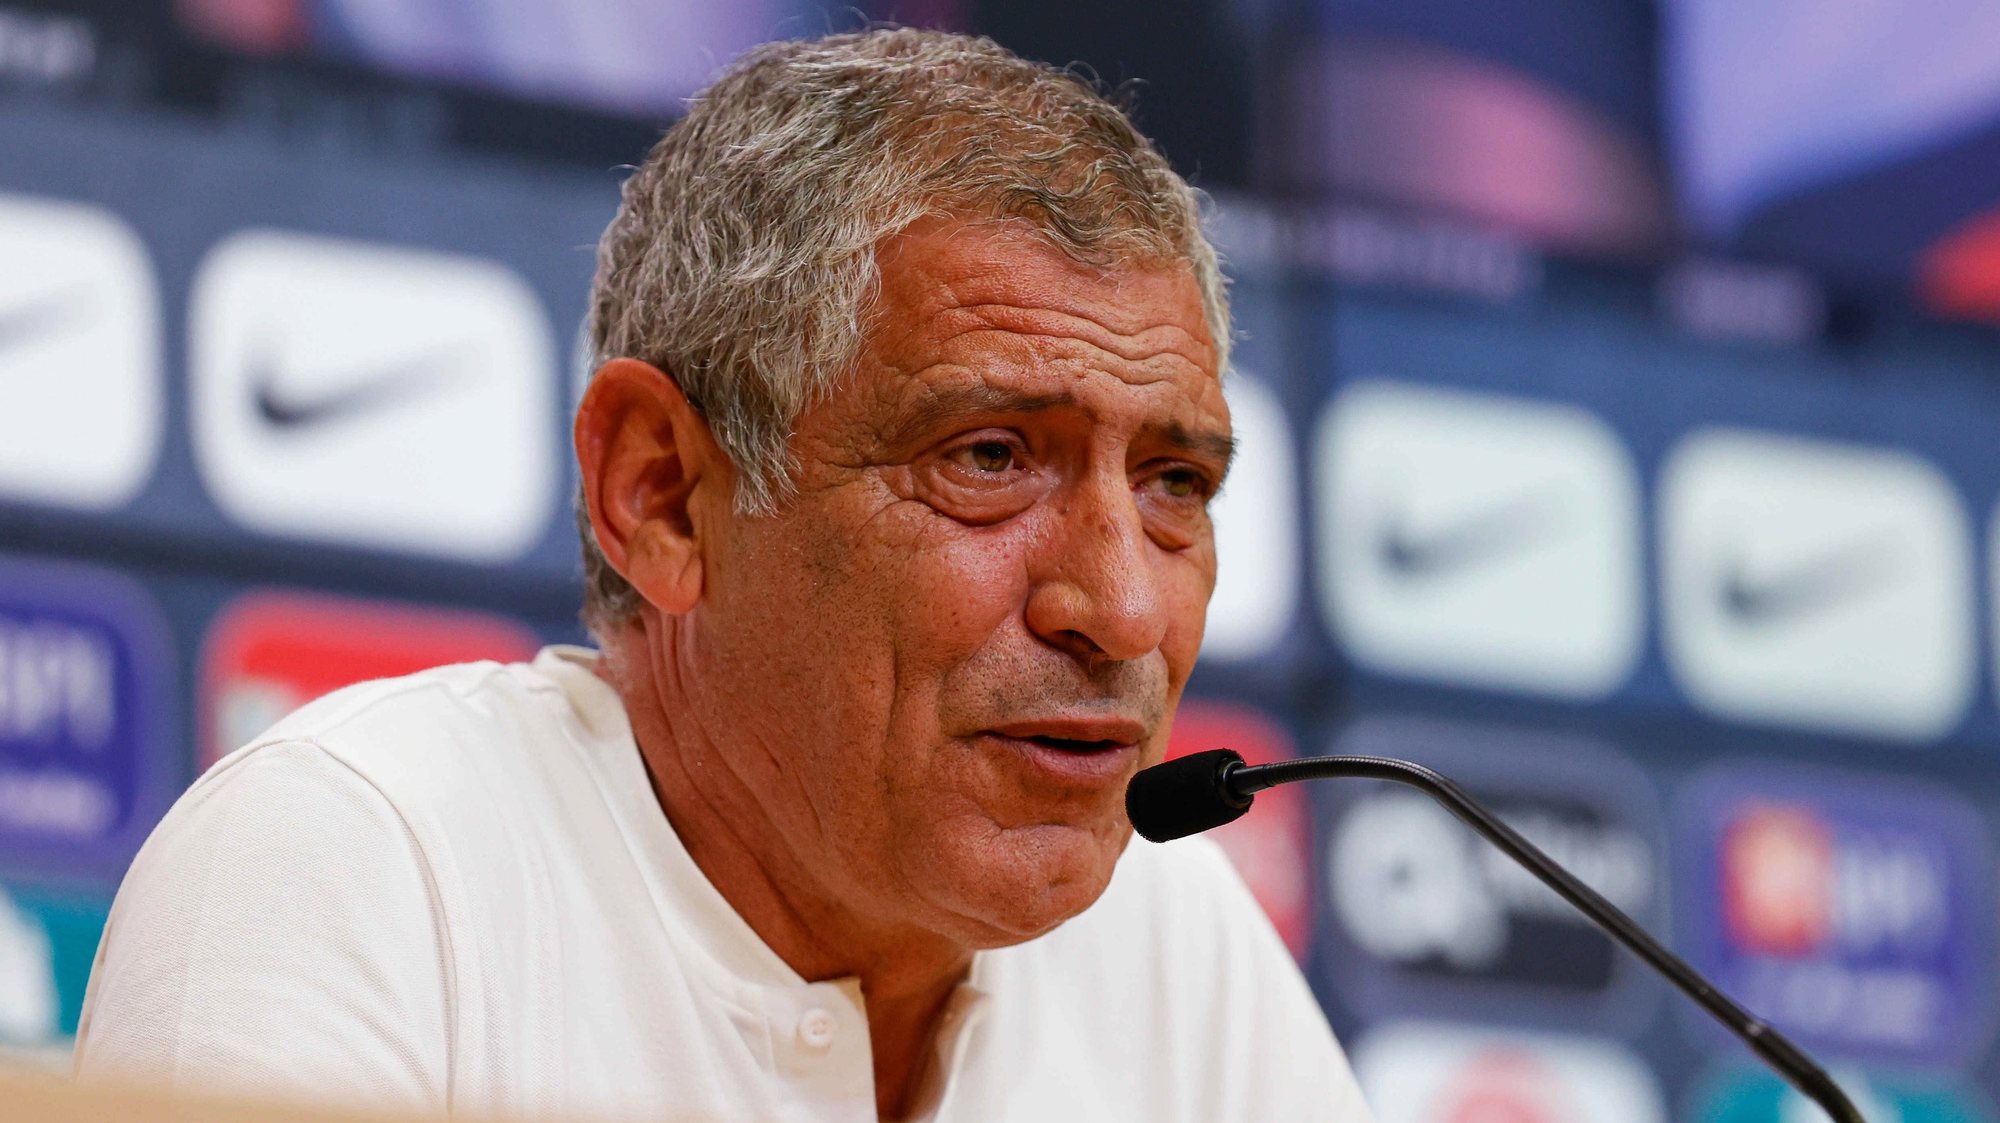 epa08811702 A handout photo made available by Portuguese Soccer Federation (FPF) shows the portuguese national soccer team head coach, Fernando Santos, during a press conference in Oeiras, Portugal, 10 November 2020.  Portugal will face Andorra in their international friendly soccer match on 11 November 2020.  EPA/DIOGO PINTO / FPF / HANDOUT  HANDOUT EDITORIAL USE ONLY/NO SALES